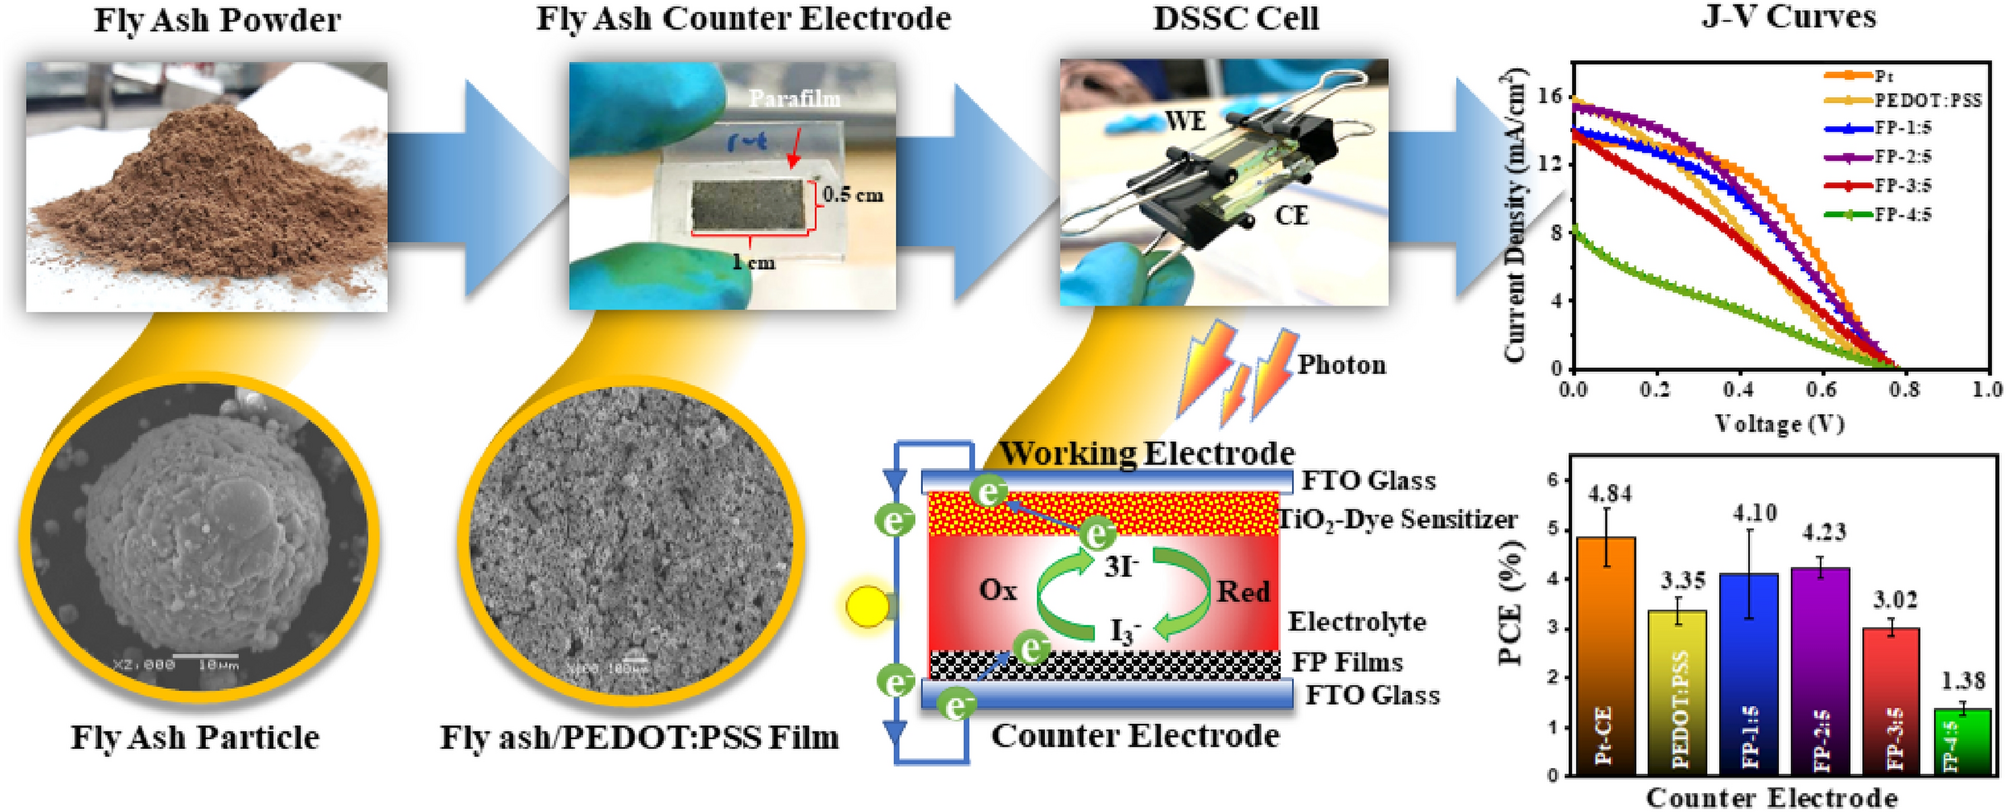 Fly ash boosted electrocatalytic properties of PEDOT:PSS counter electrodes  for the triiodide reduction in dye-sensitized solar cells